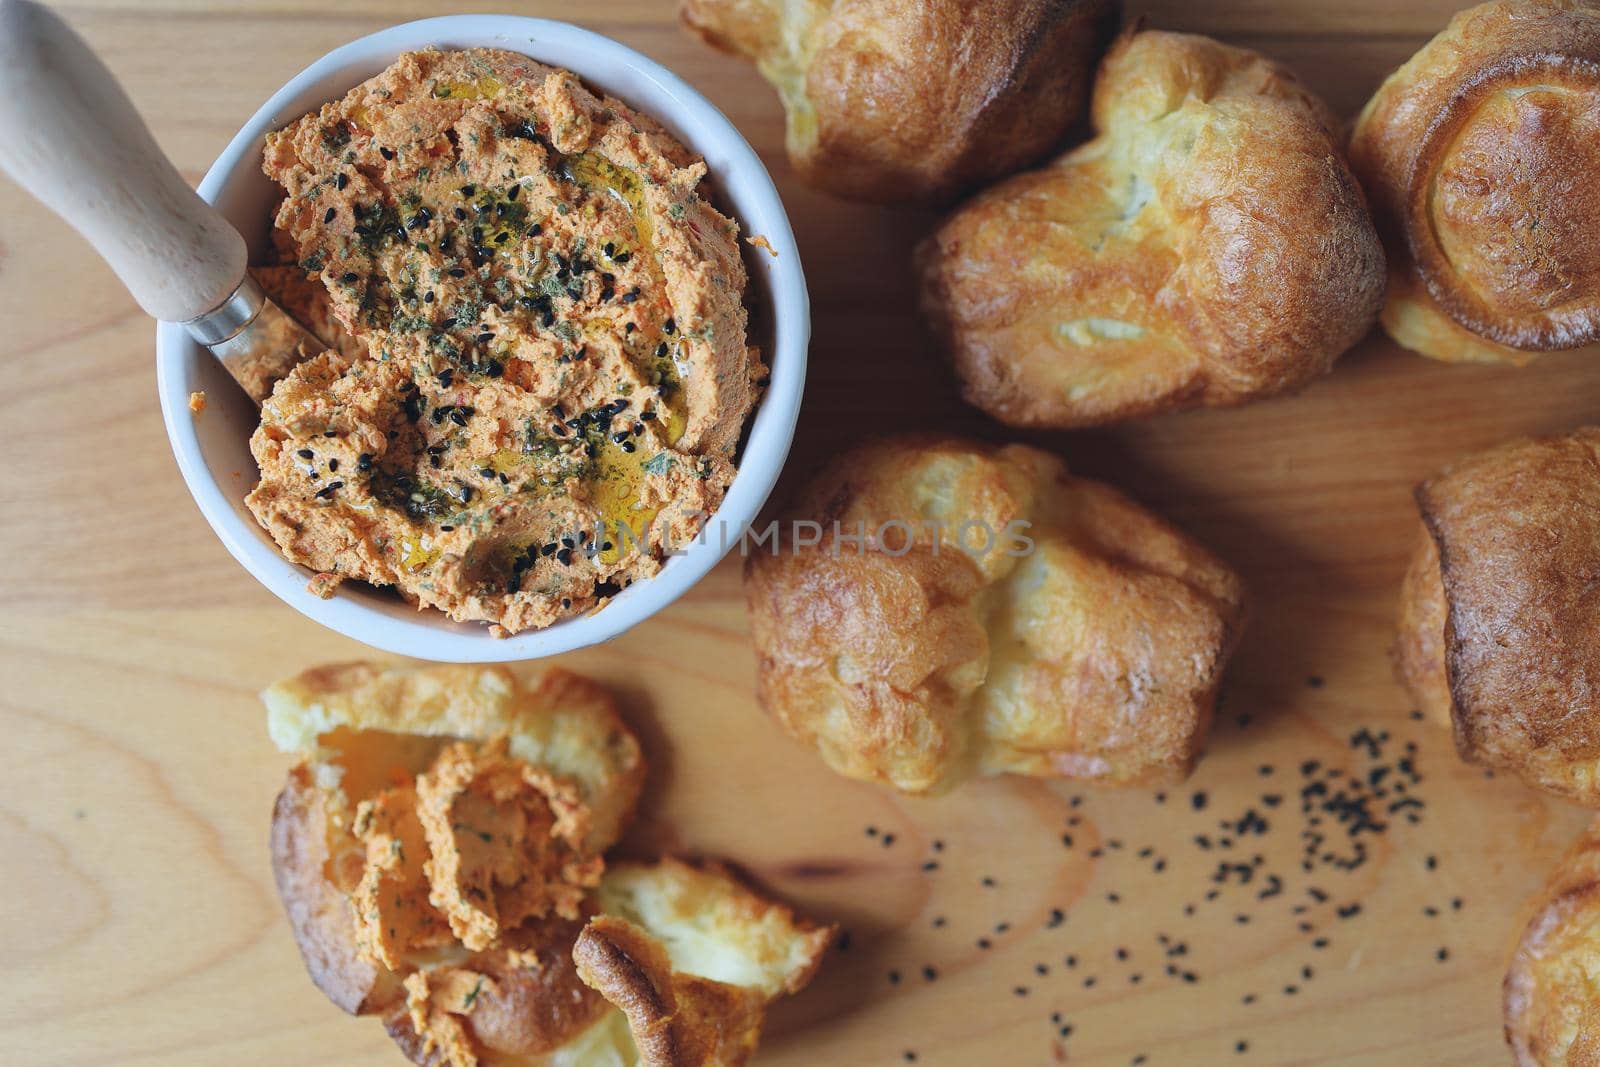 ricotta dip with sun-dried tomatoes and baked paprika in a ceramic white bowl and homemade popovers, which is a puffed, airy, and eggy hollow roll, is fresh from the oven. Top View